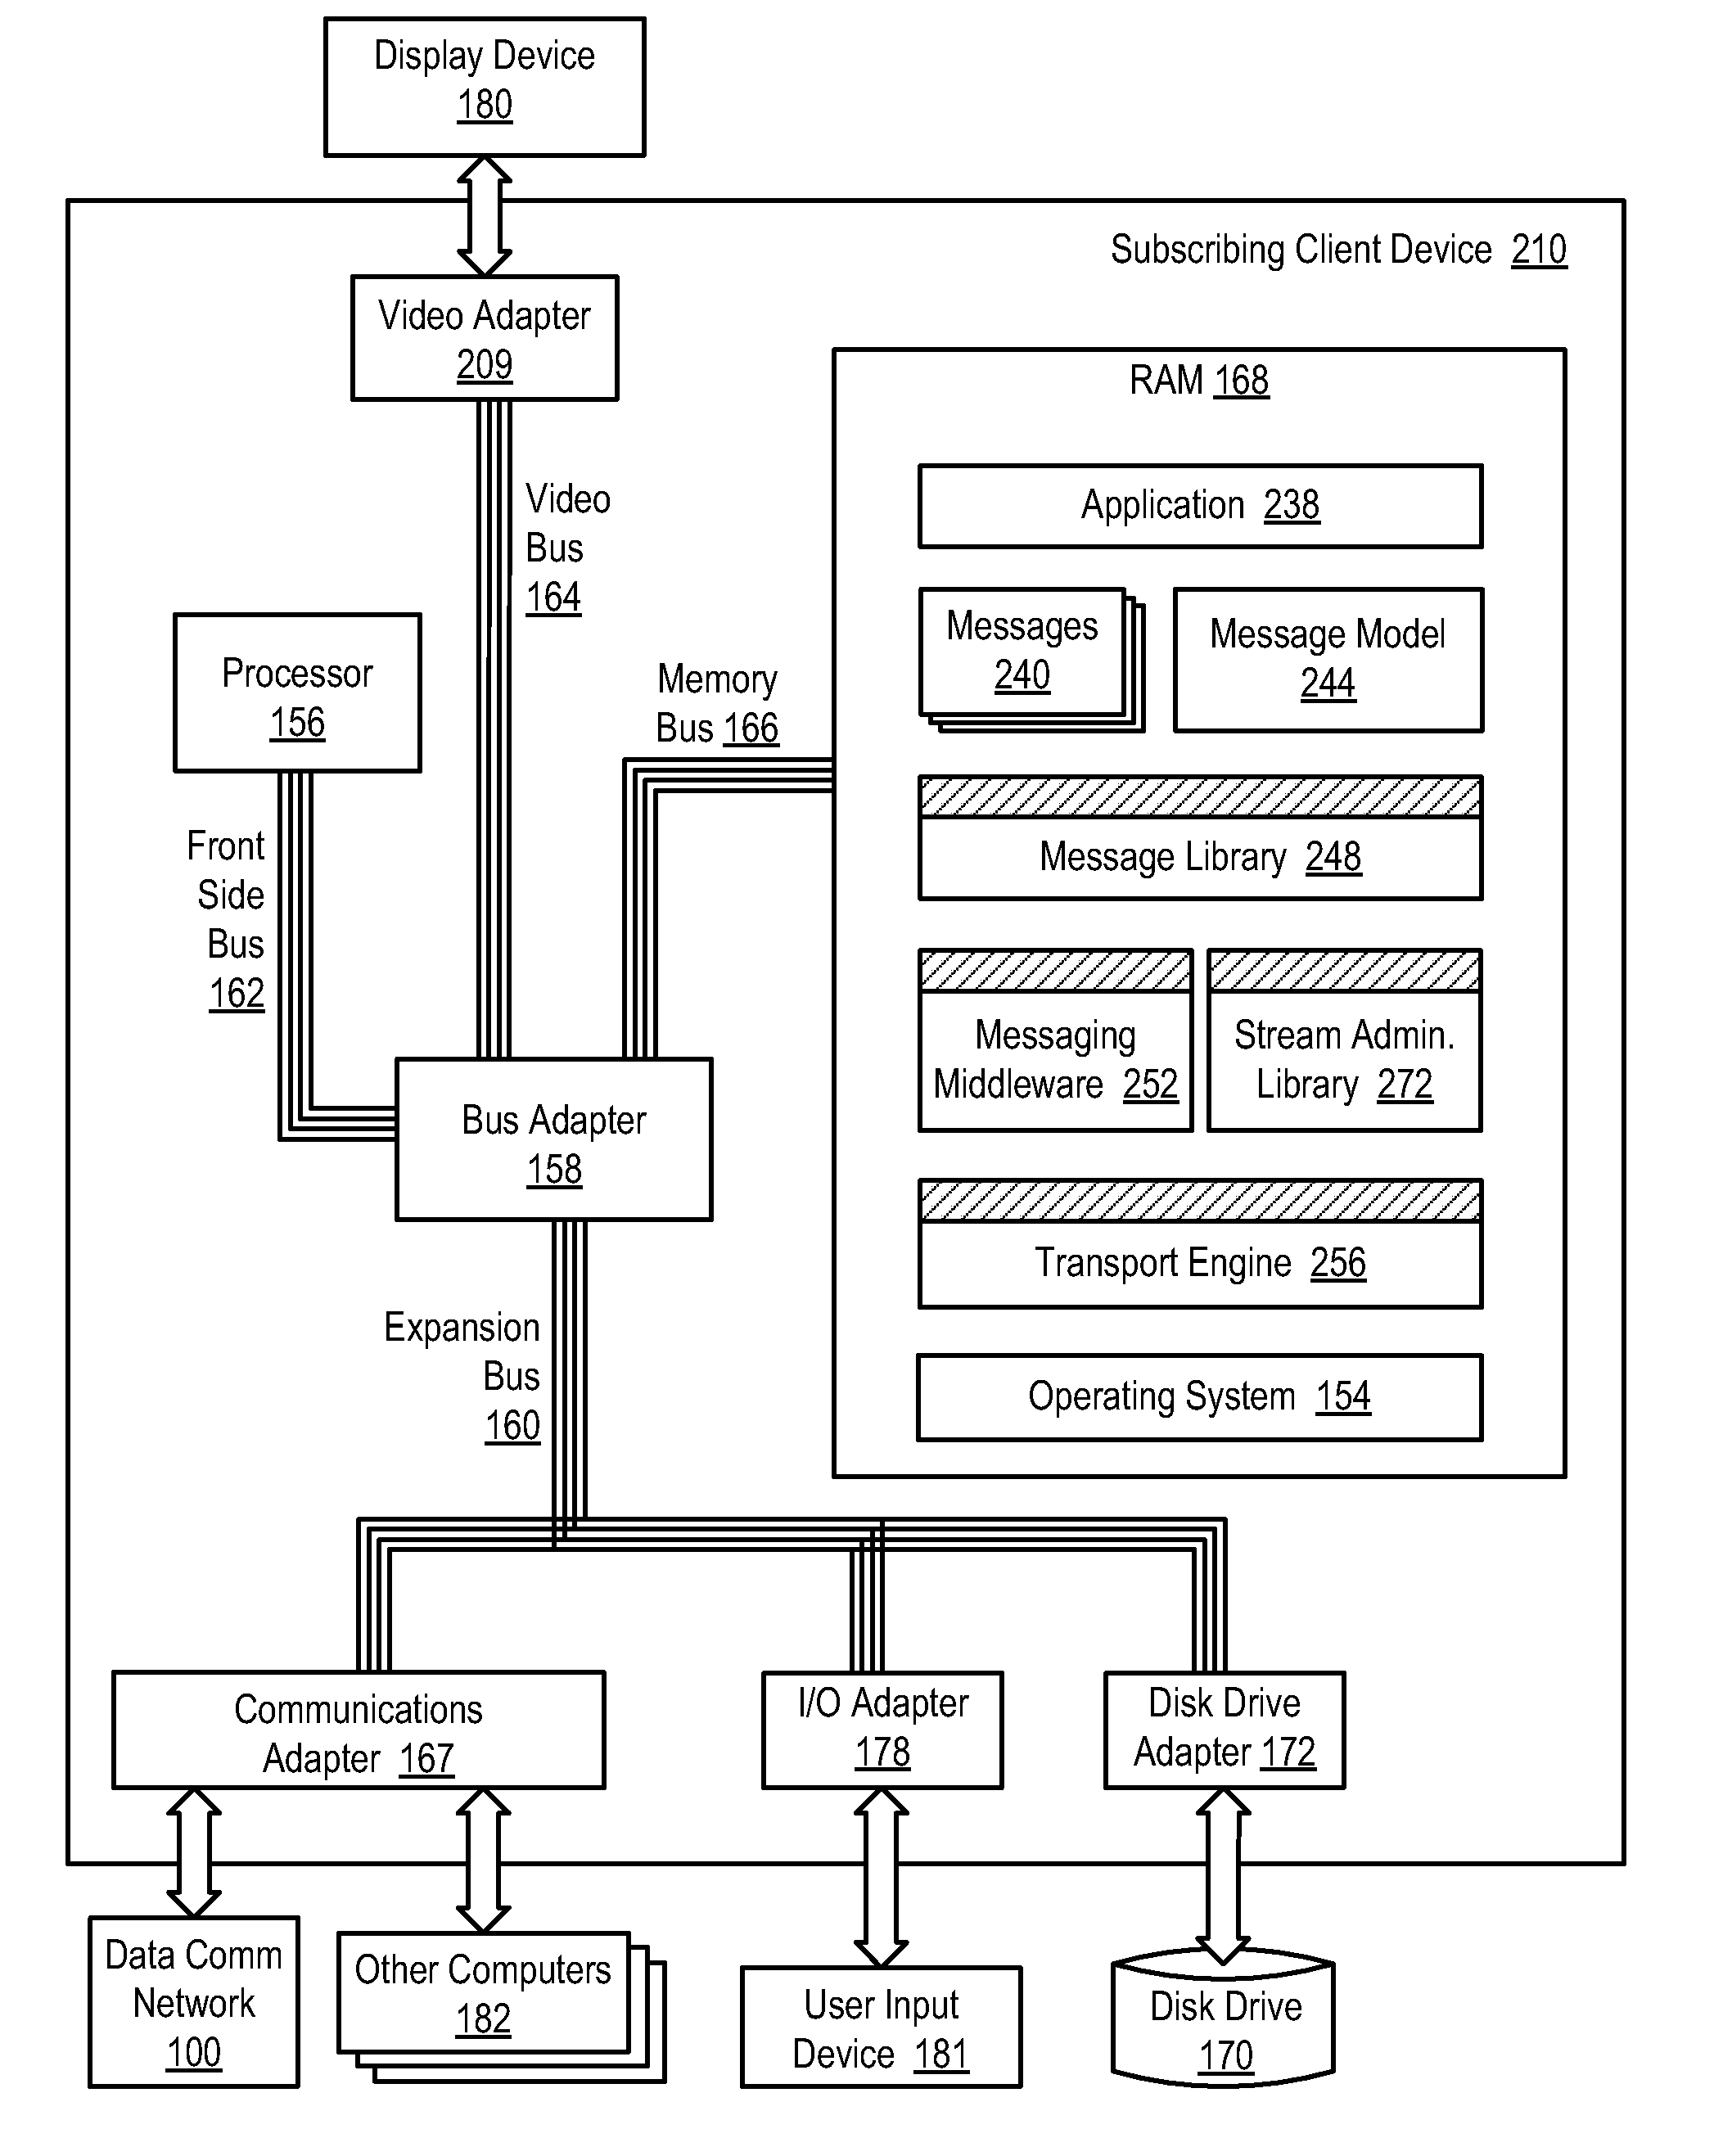 Synchronizing an active feed adapter and a backup feed adapter in a high speed, low latency data communications environment